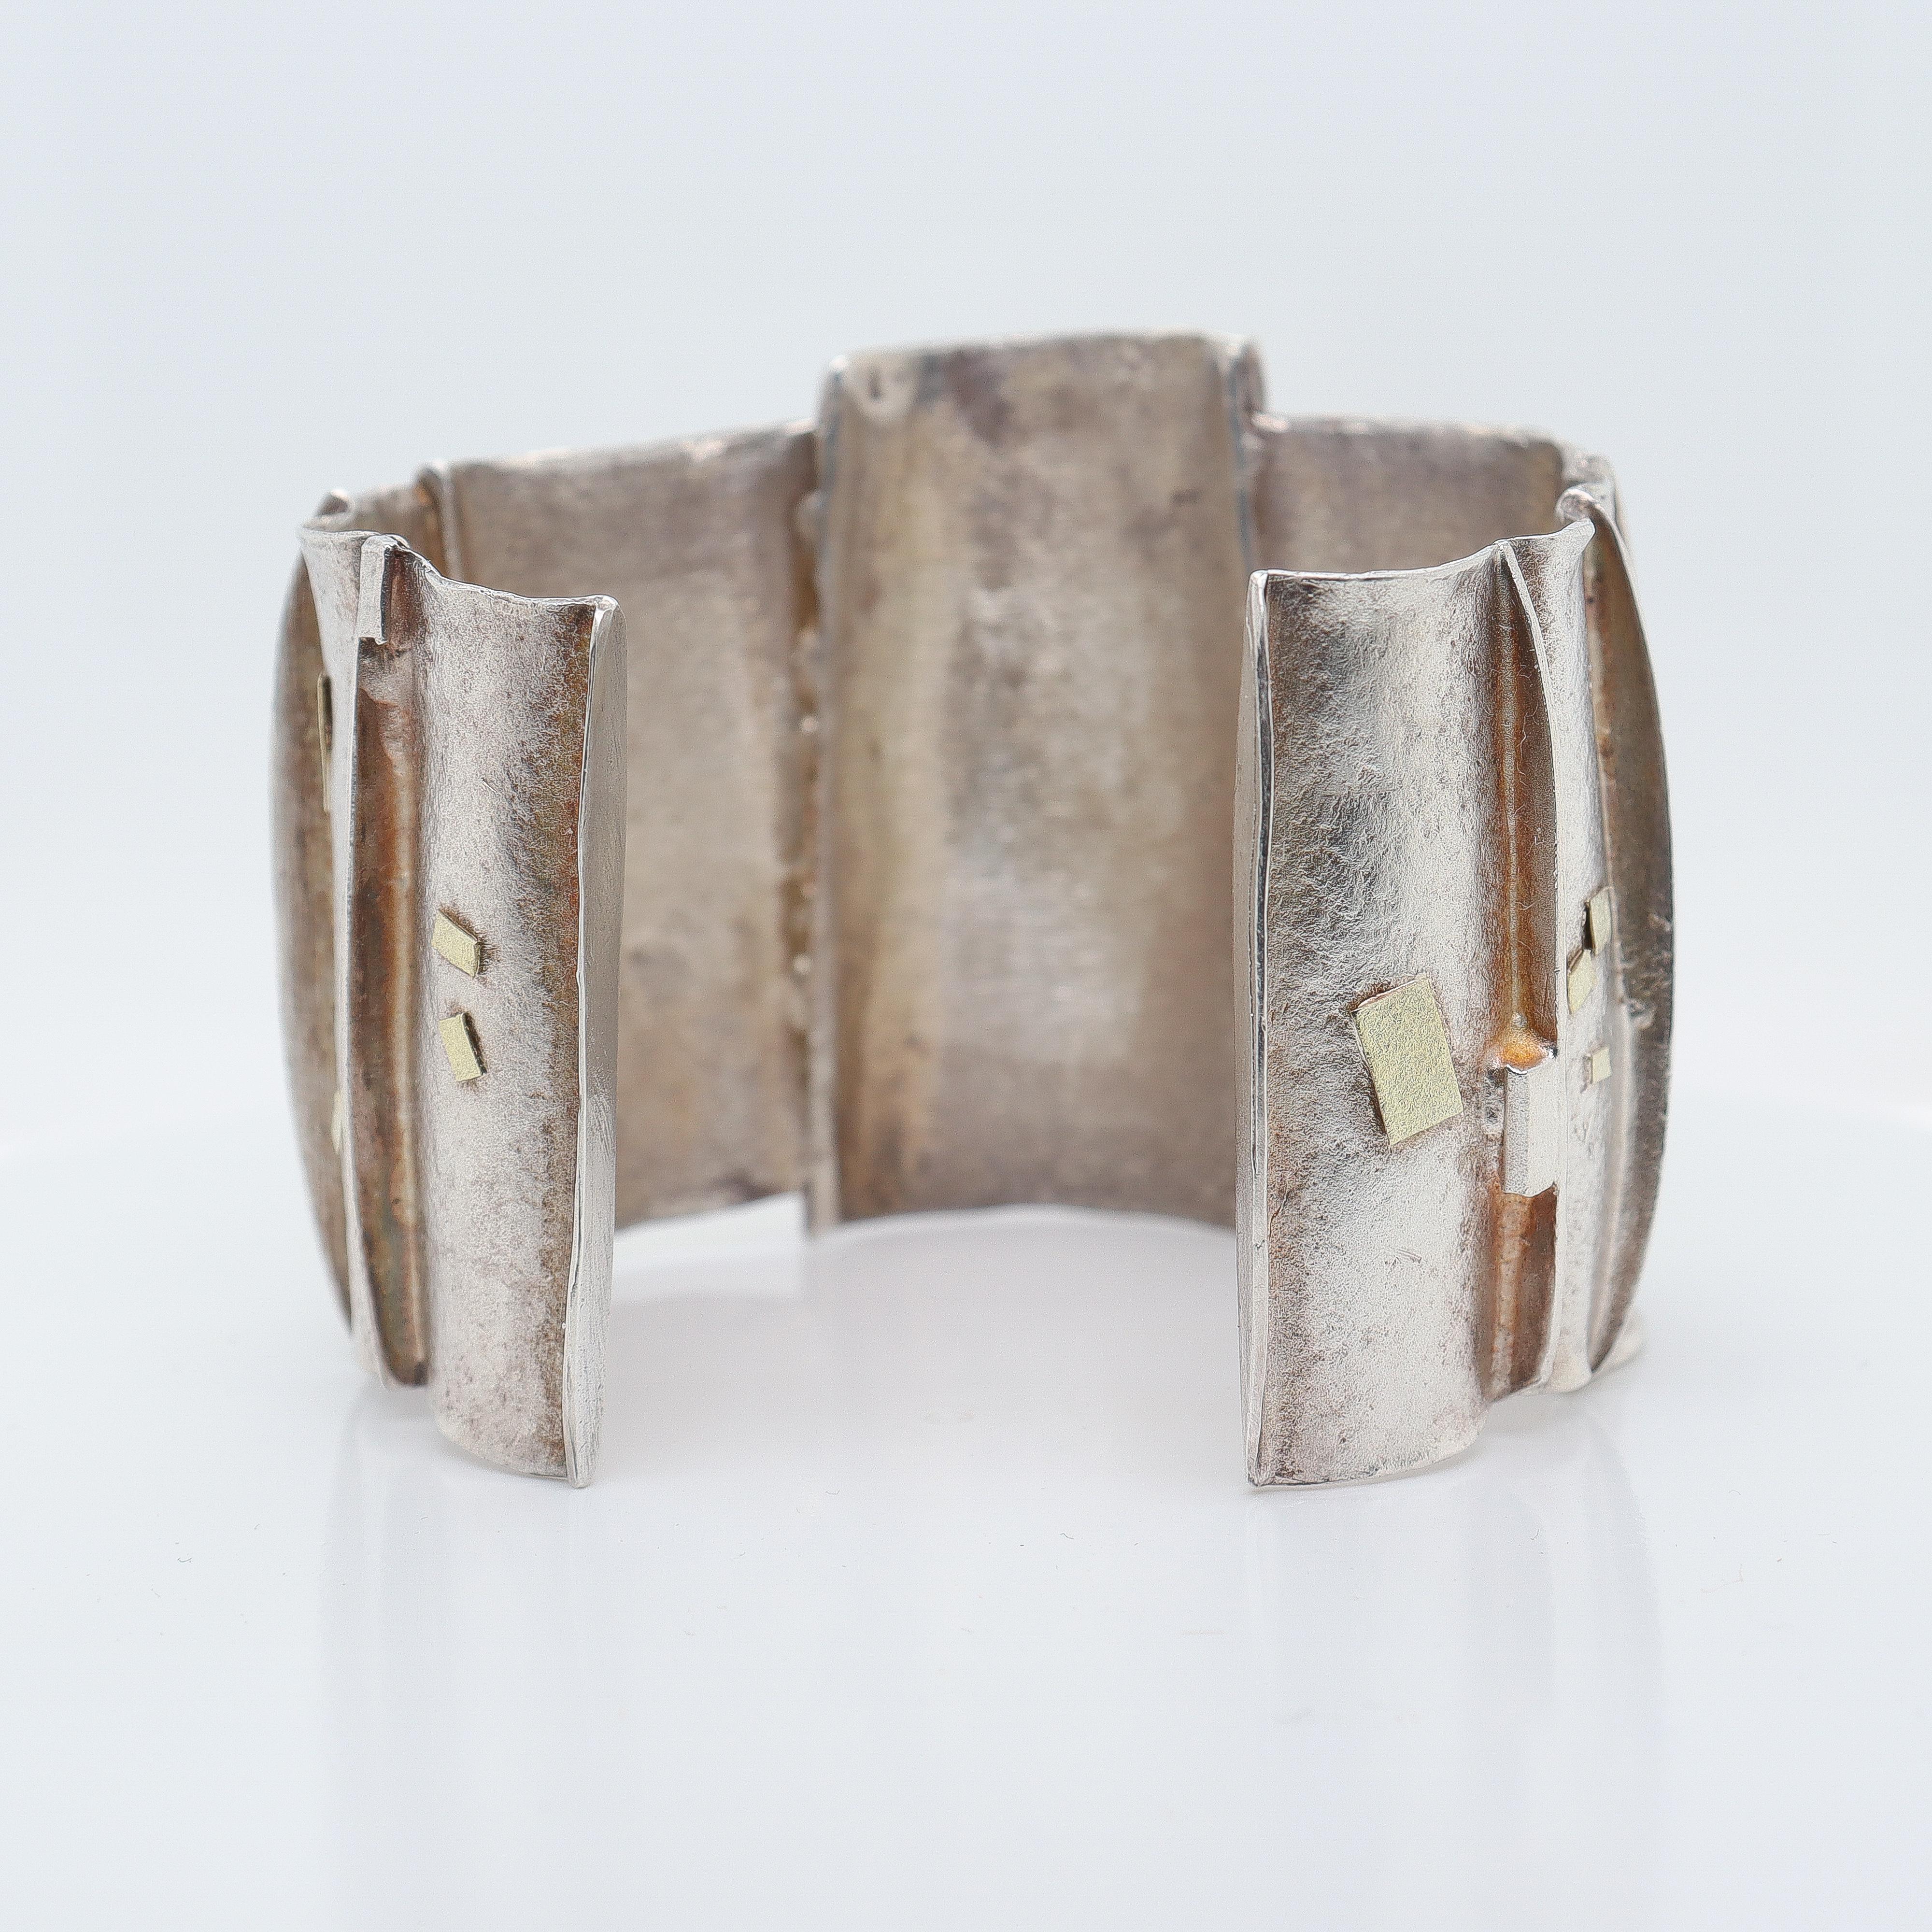 Modernist Silver, Gold, & Amethyst Cuff Bracelet Attributed to Enid Kaplan In Good Condition For Sale In Philadelphia, PA